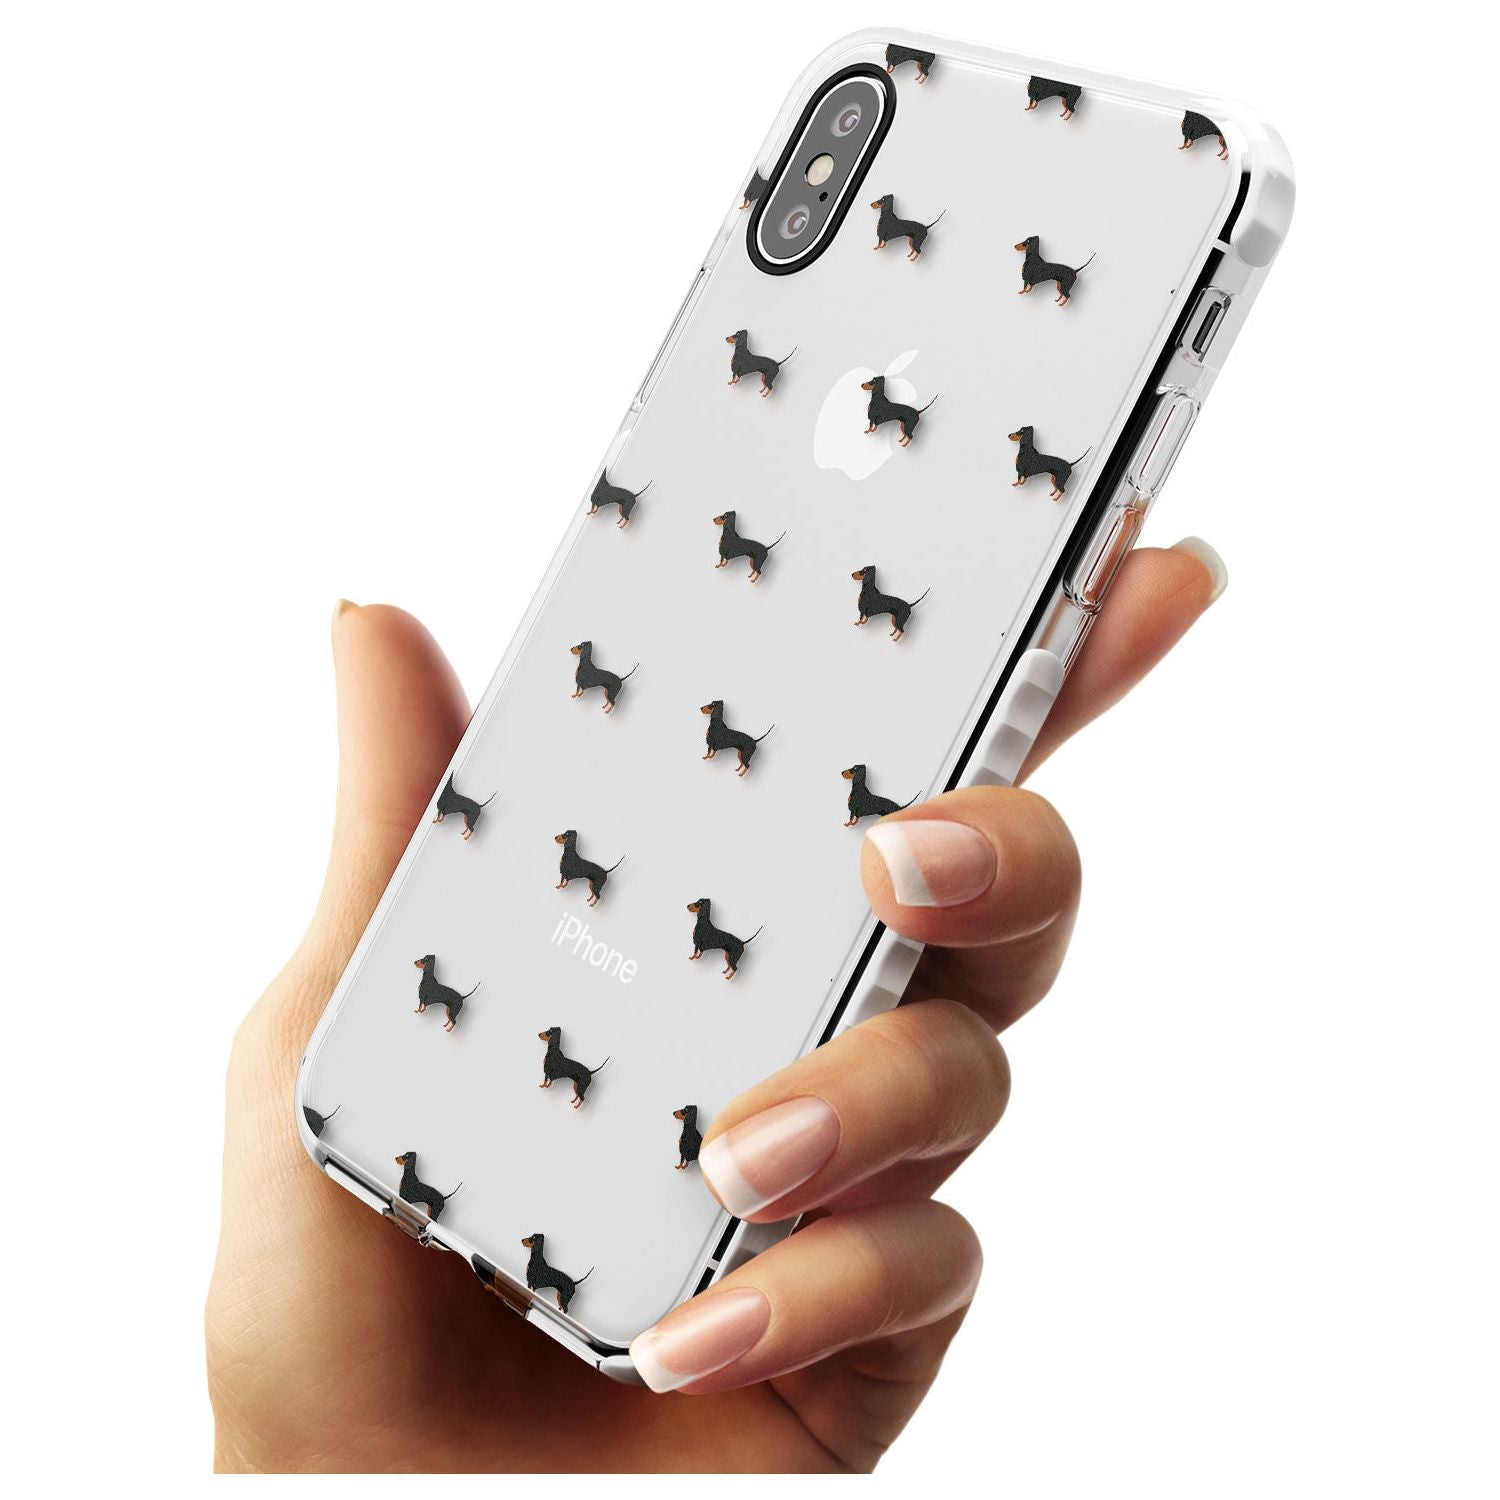 Dachshund Dog Pattern Clear Impact Phone Case for iPhone X XS Max XR